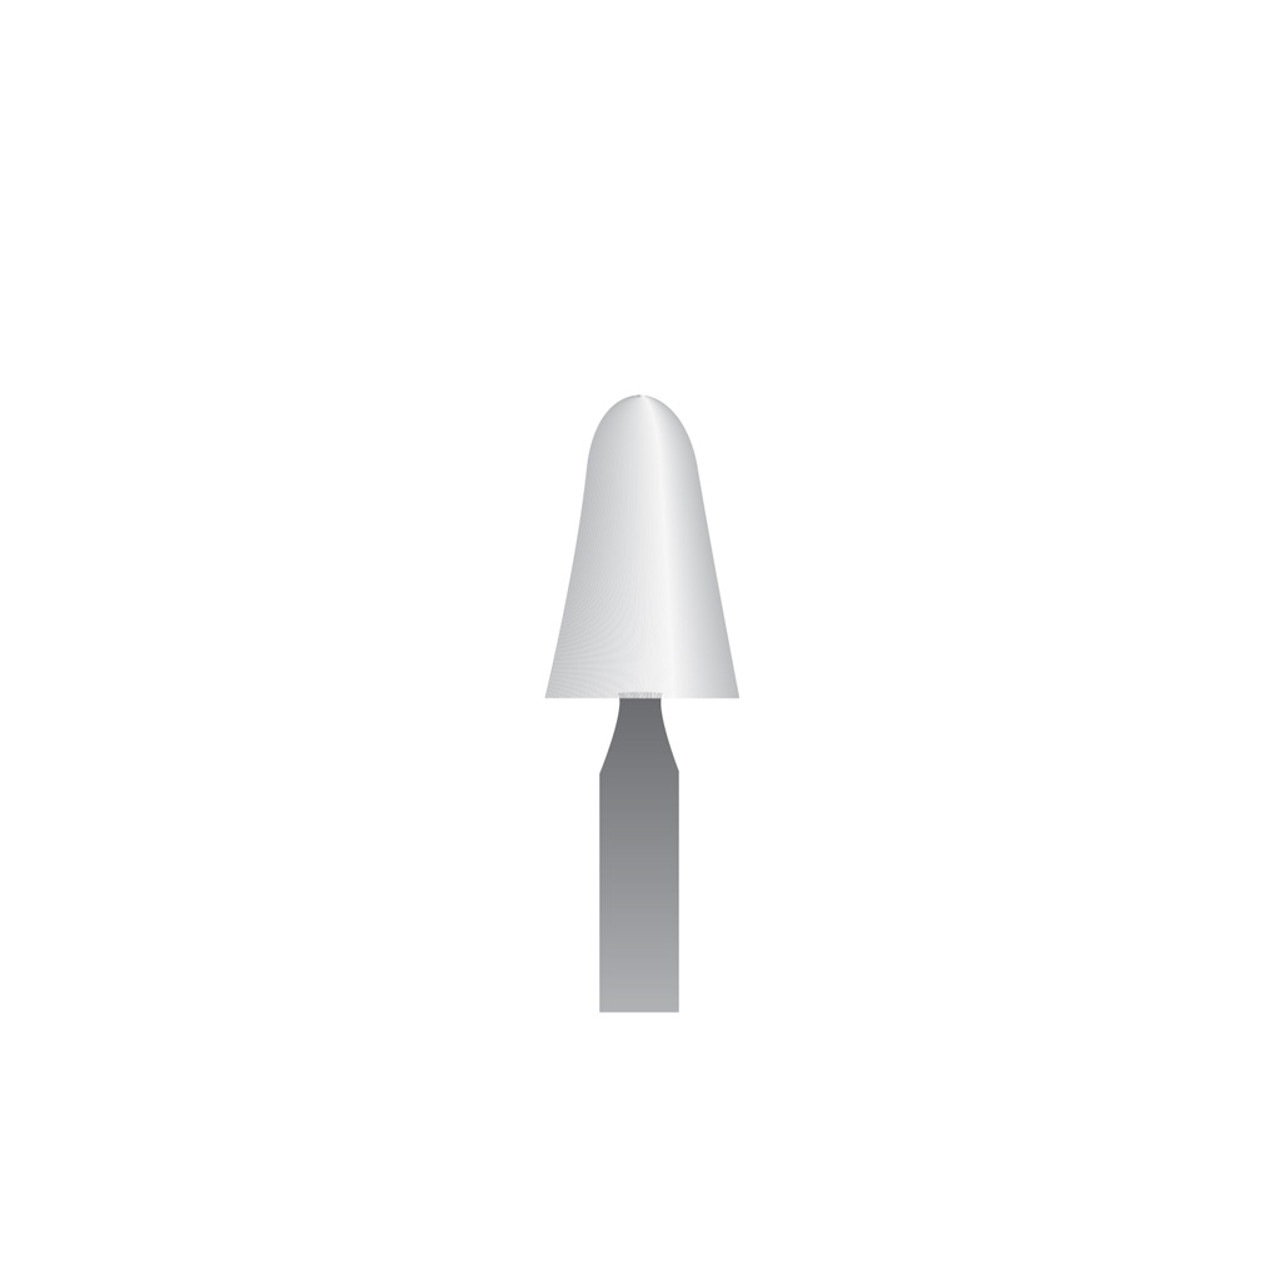 22P White Mounted Points 3/32" Shank (Pkg of 24)